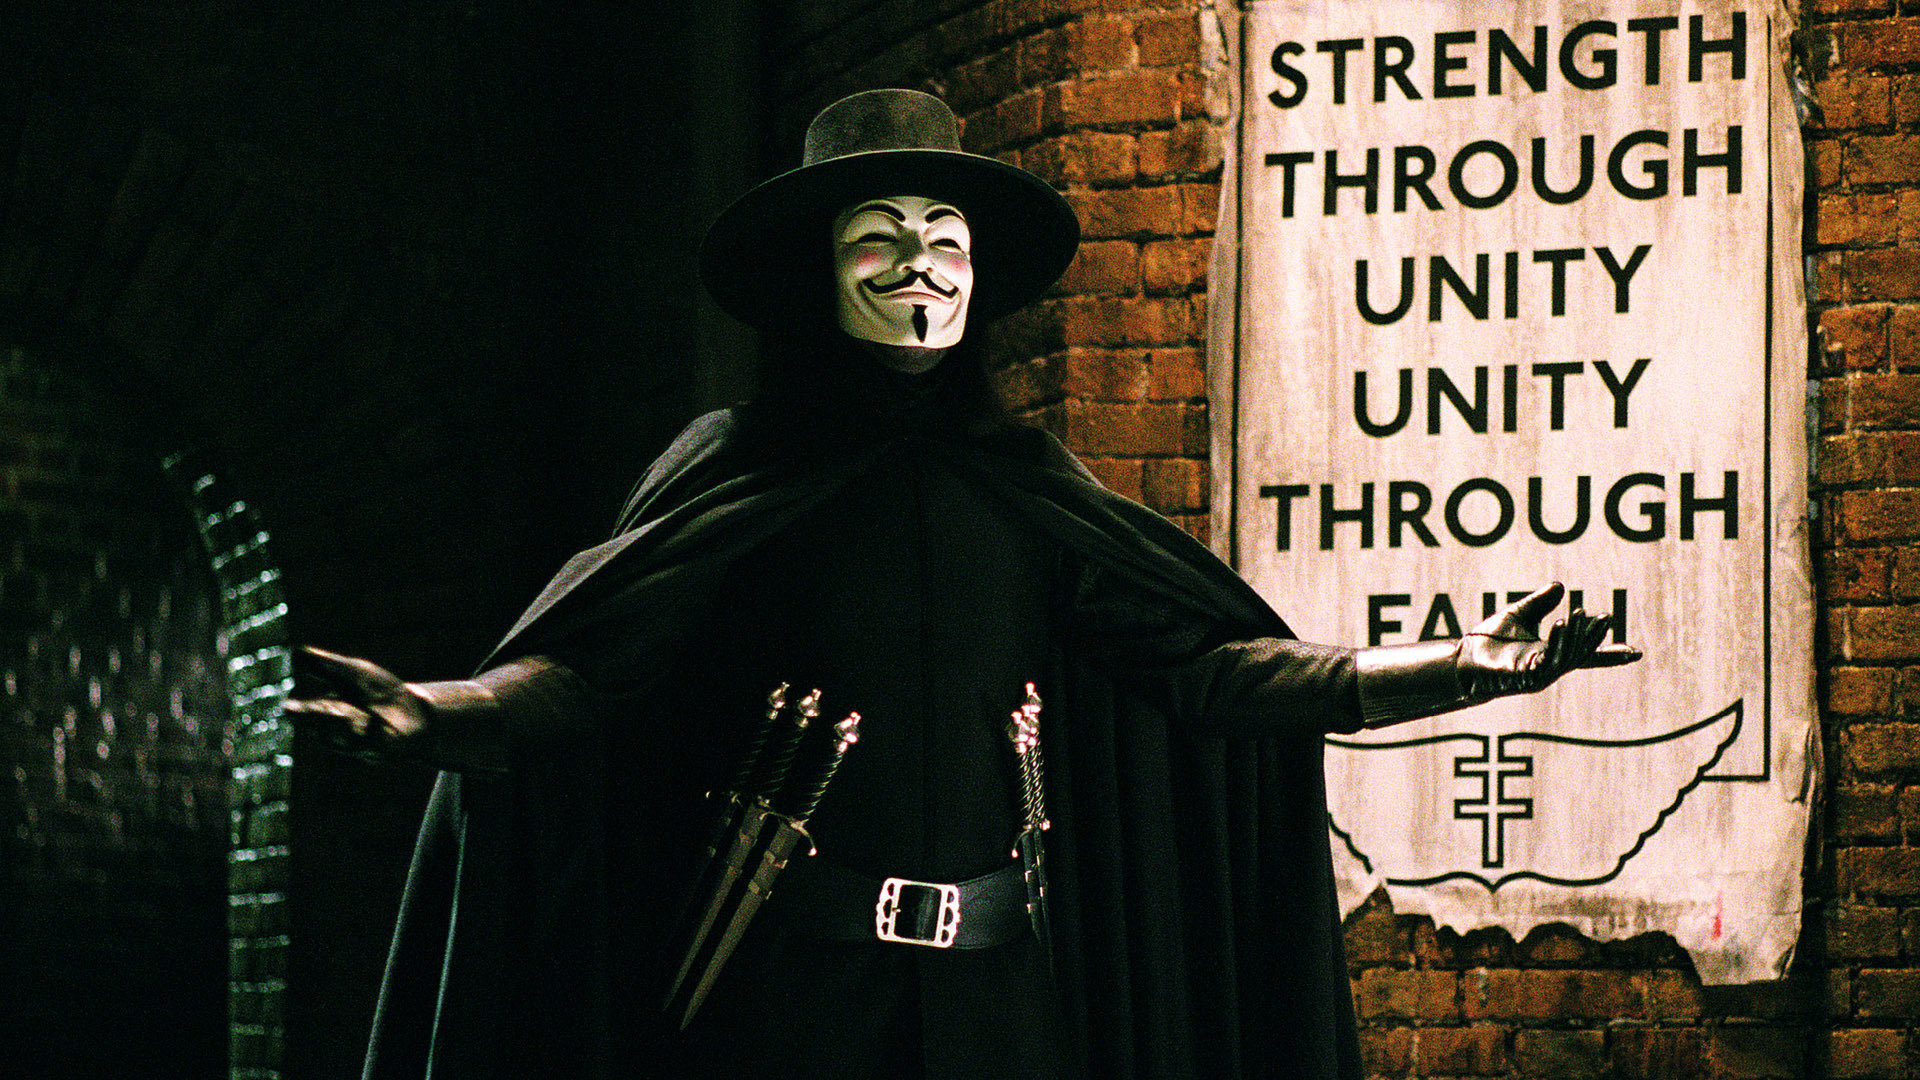 V for Vendetta: A man in a Guy Fawkes mask who uses terrorist tactics to fight the oppressive society they live in. 1920x1080 Full HD Background.